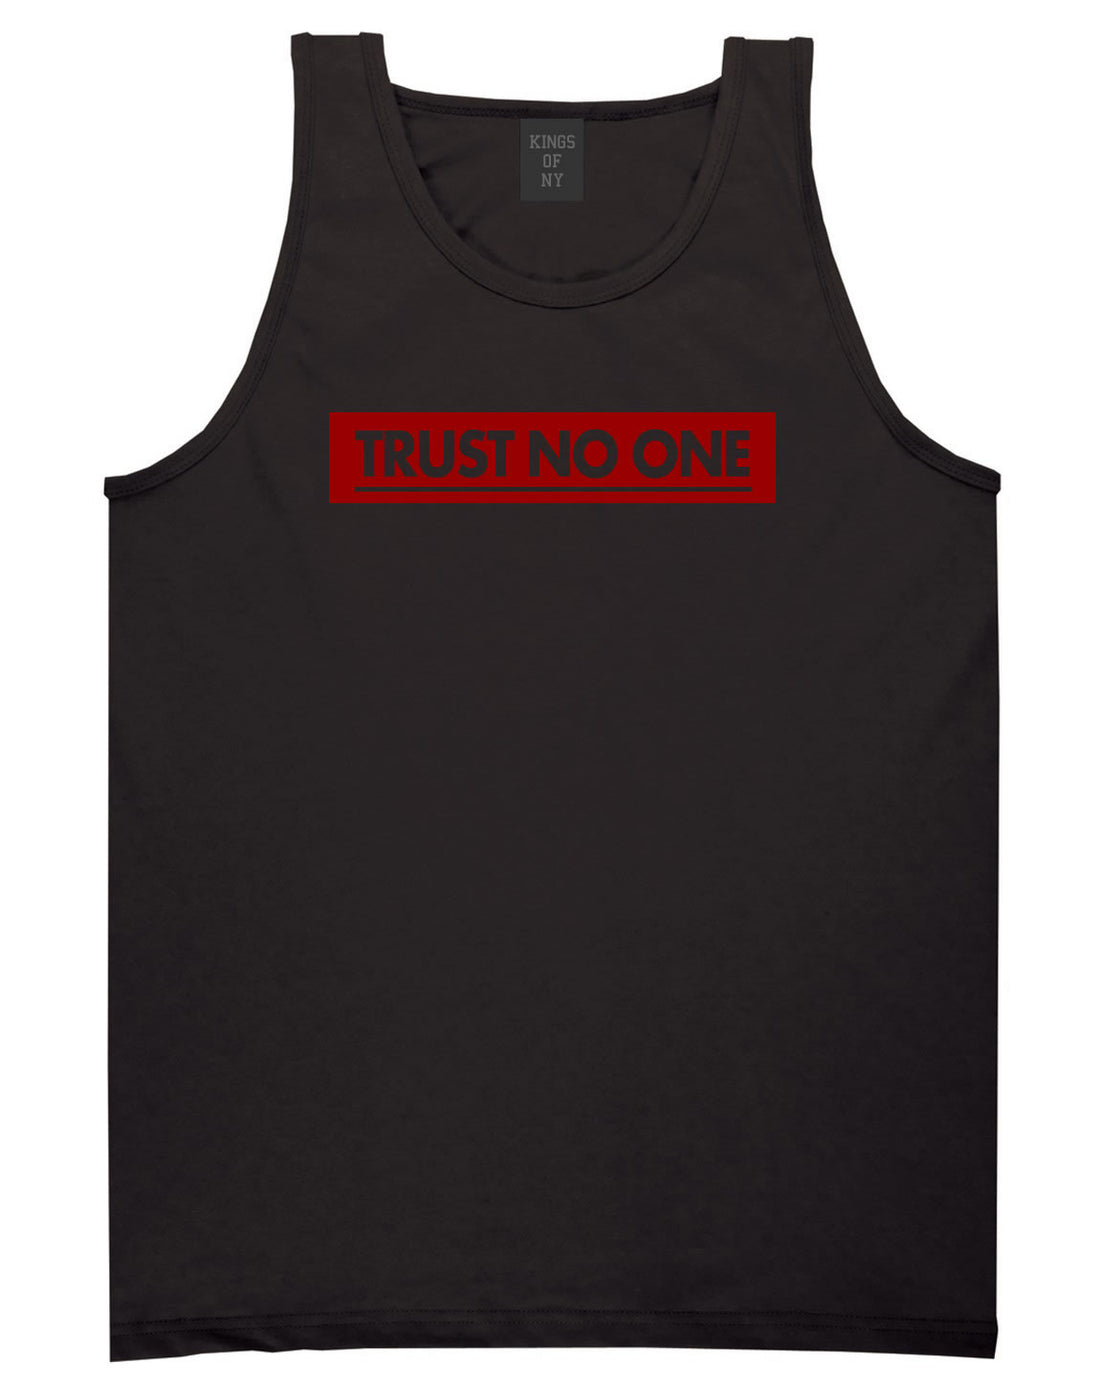 Trust No One Tank Top in Black By Kings Of NY